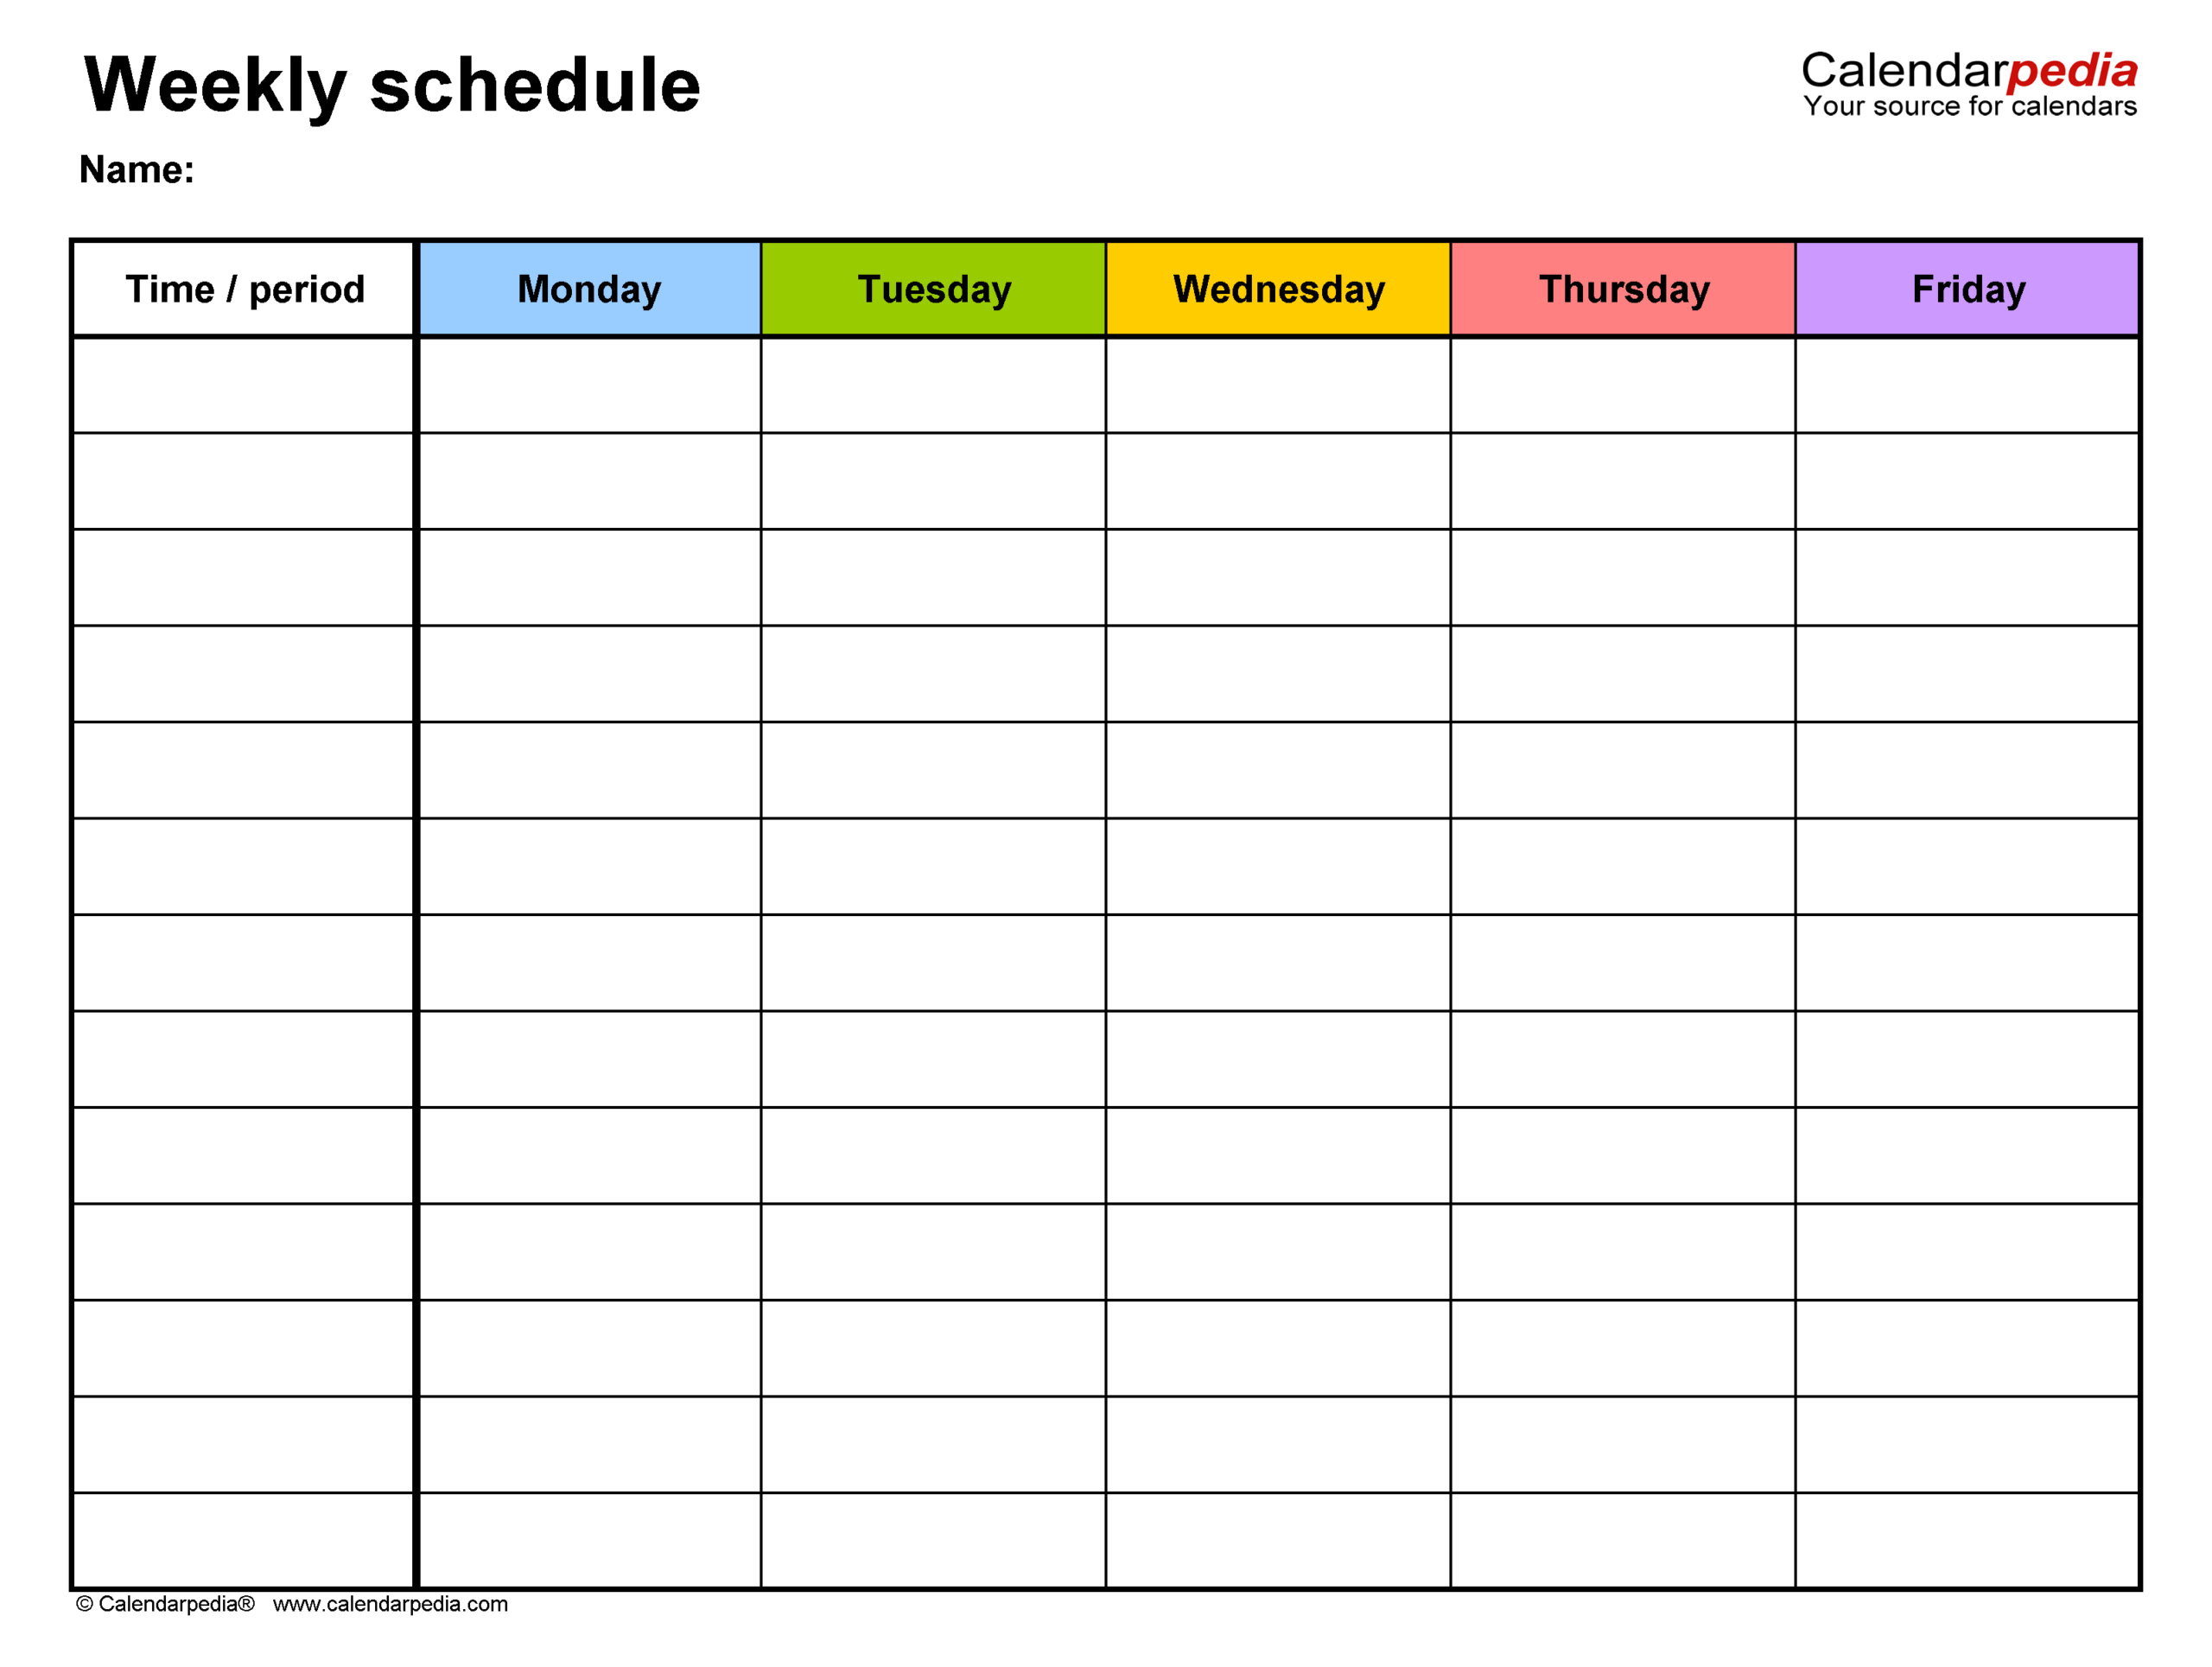 Free Weekly Schedule Templates For Word  18 Templates throughout Monday Through Friday Weekly Calendar Template